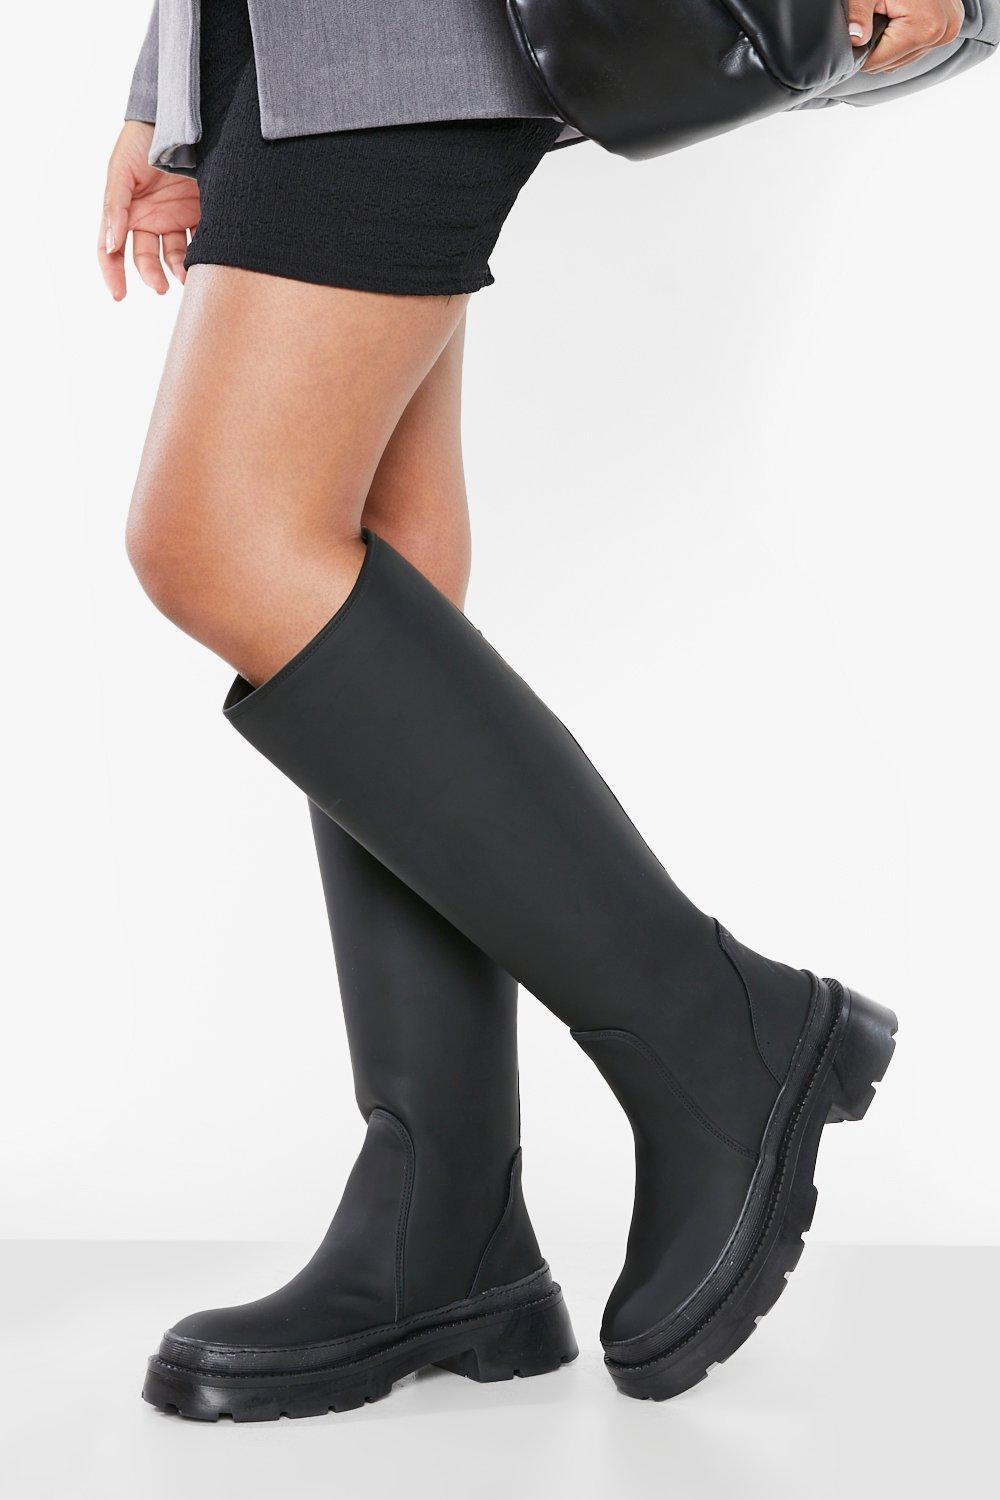 Boohoo Knee High Rubber Boots in Black | Lyst